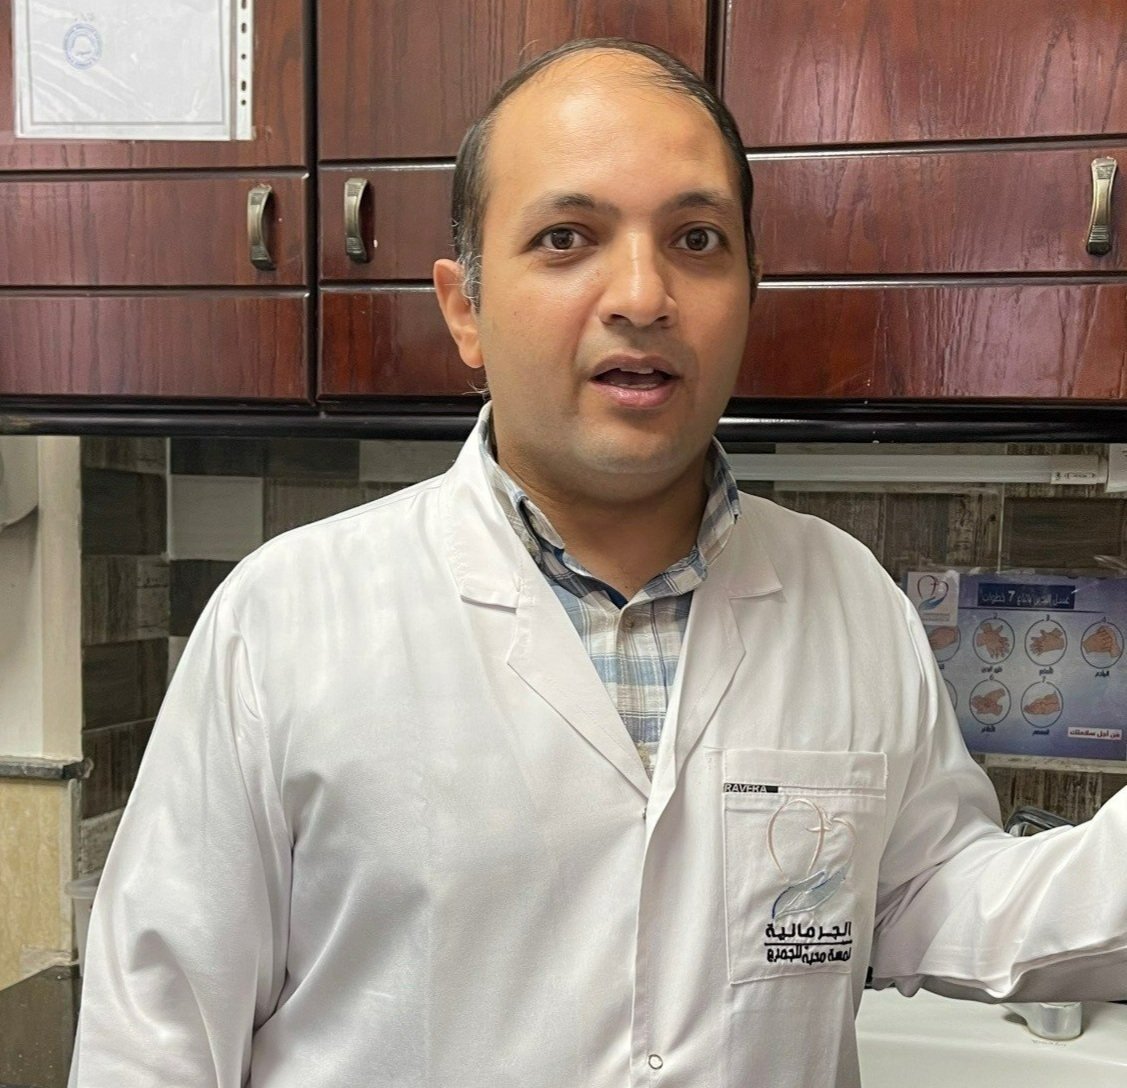  Dr. Rafeek Effat, the hospital’s medical director, has the heart of an evangelist with the skills of a doctor 